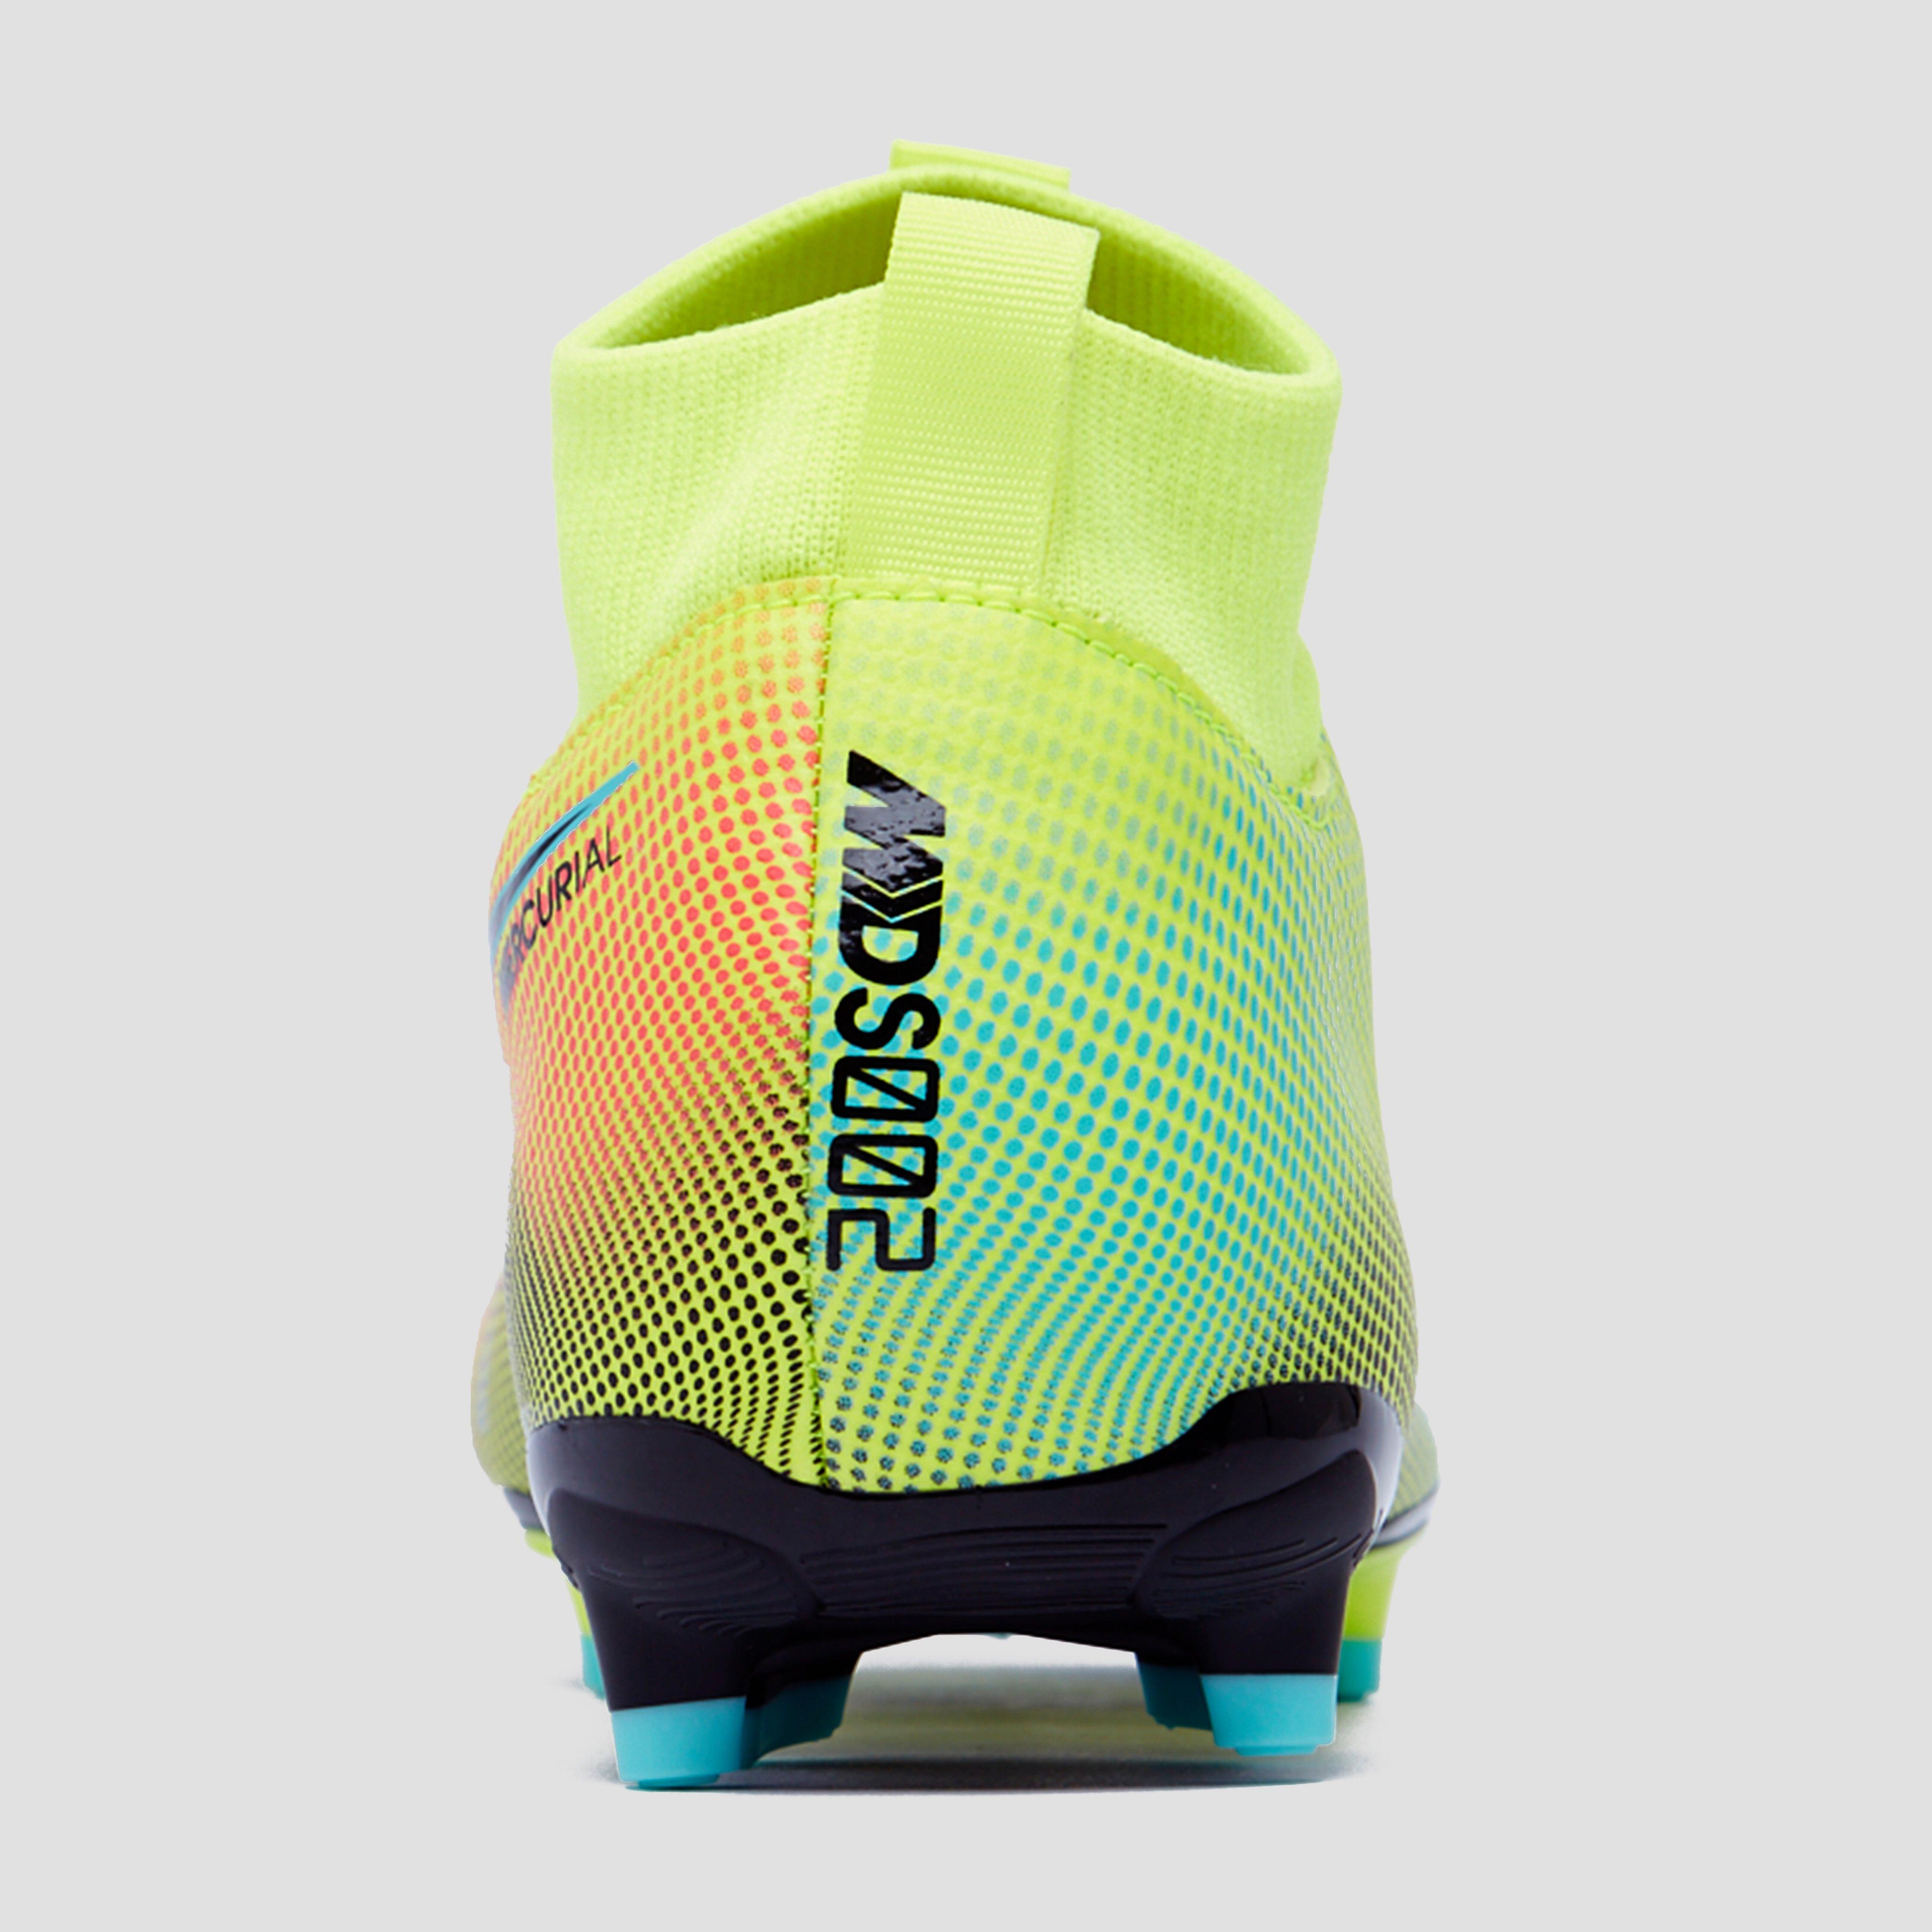 Nike Mercurial Superfly 6 Academy MG Game Over. Unisport